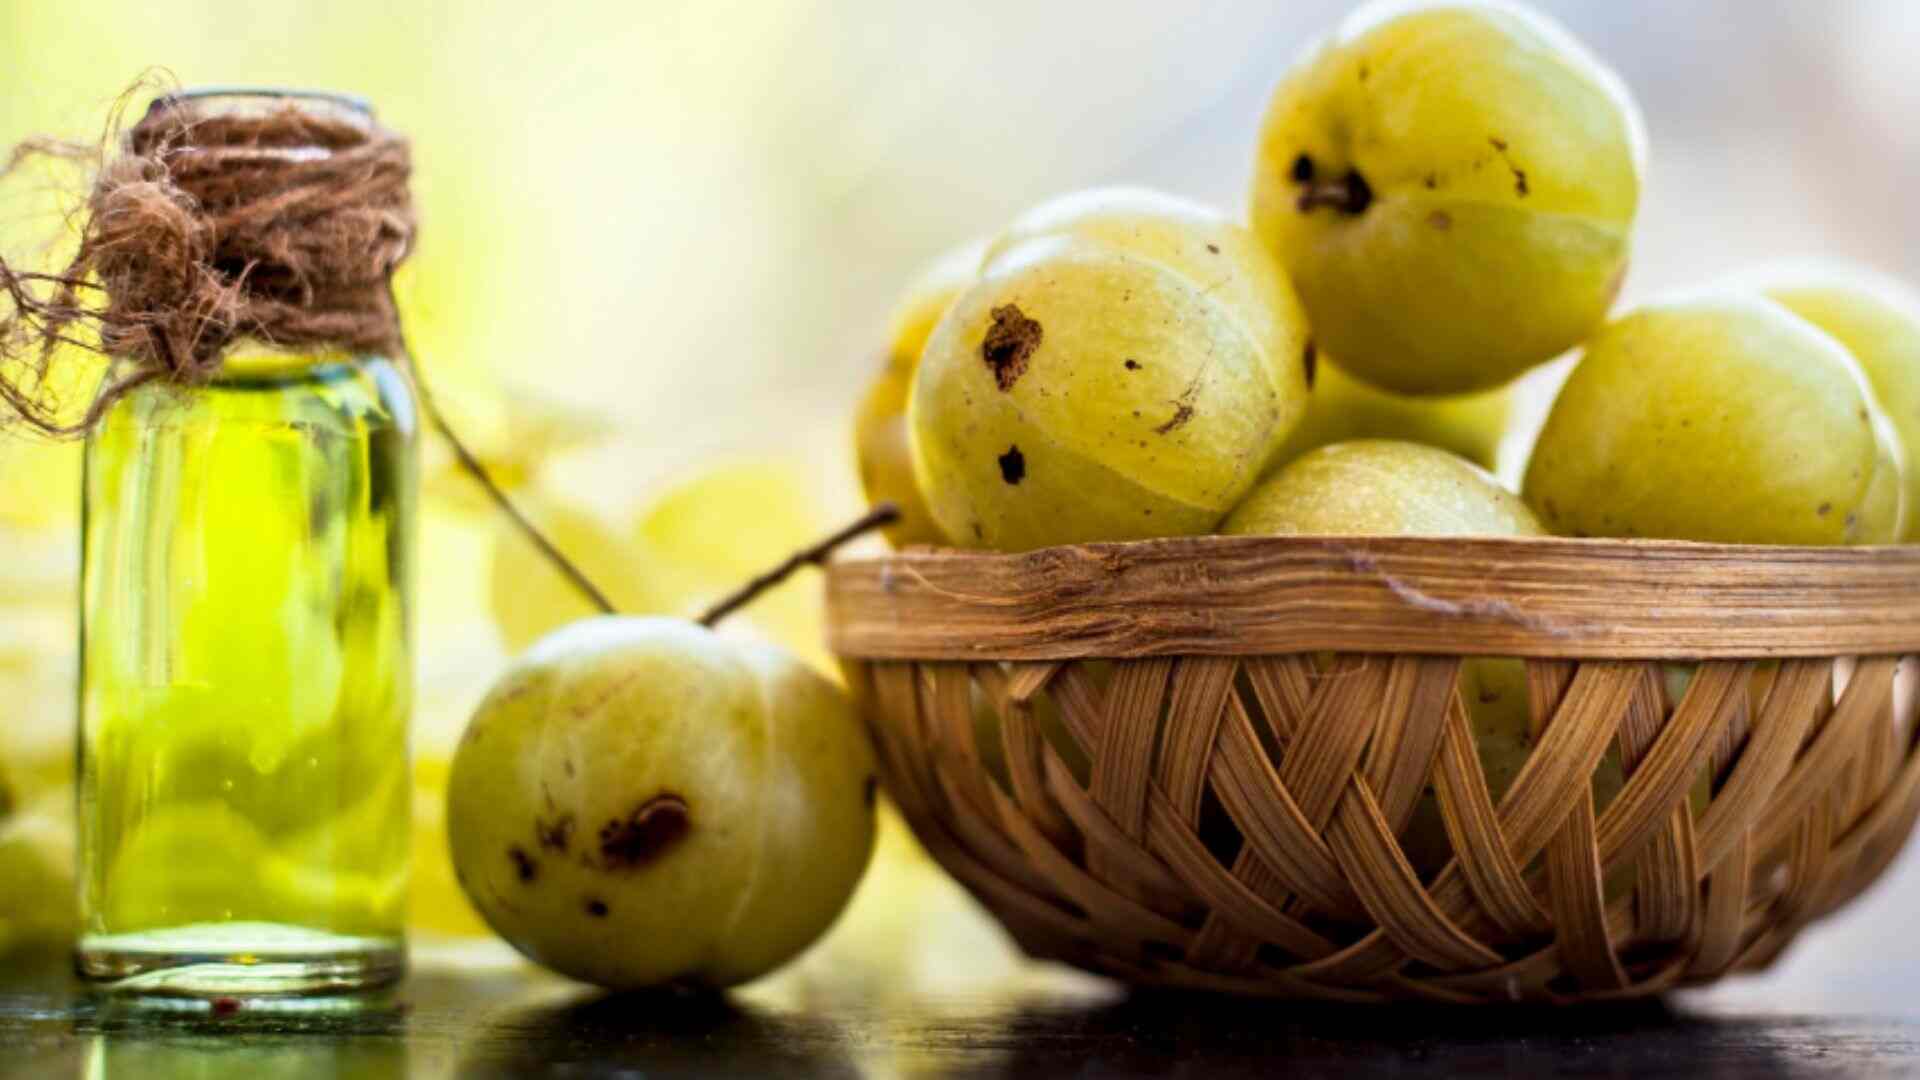 Can Gooseberry Jam Help Tackle Iron Deficiency During Menstruation?